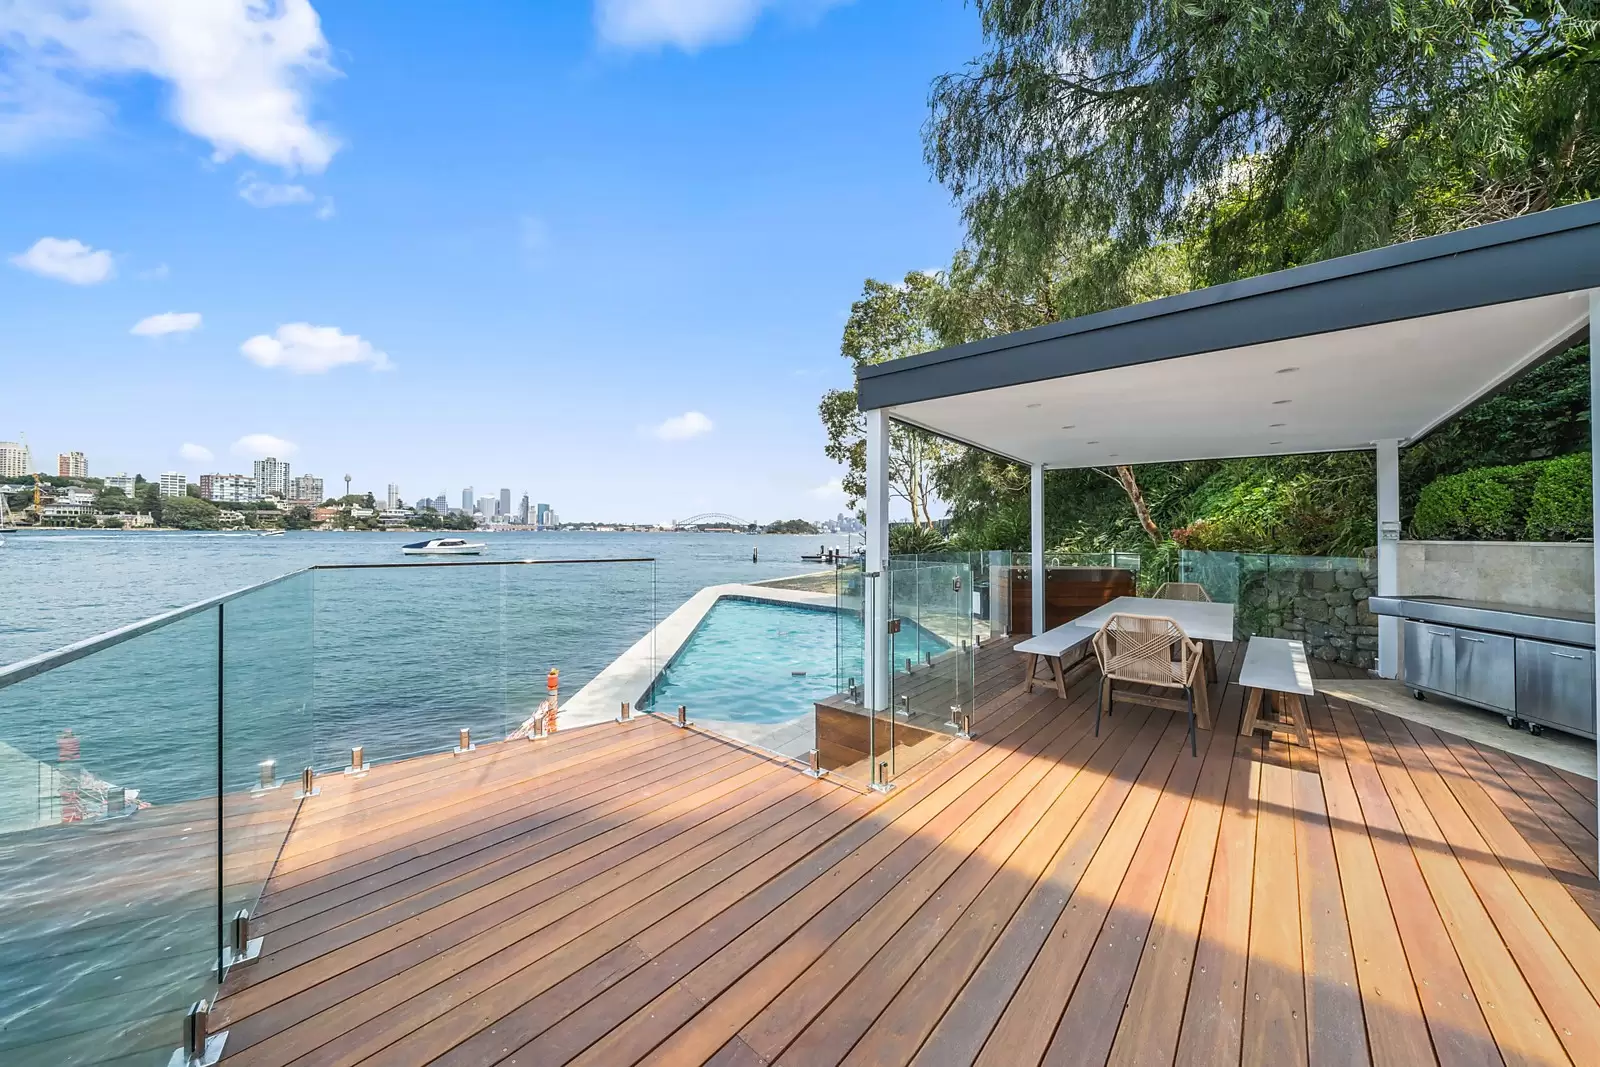 Photo #10: 10/78 Wolseley Road, Point Piper - Sold by Sydney Sotheby's International Realty